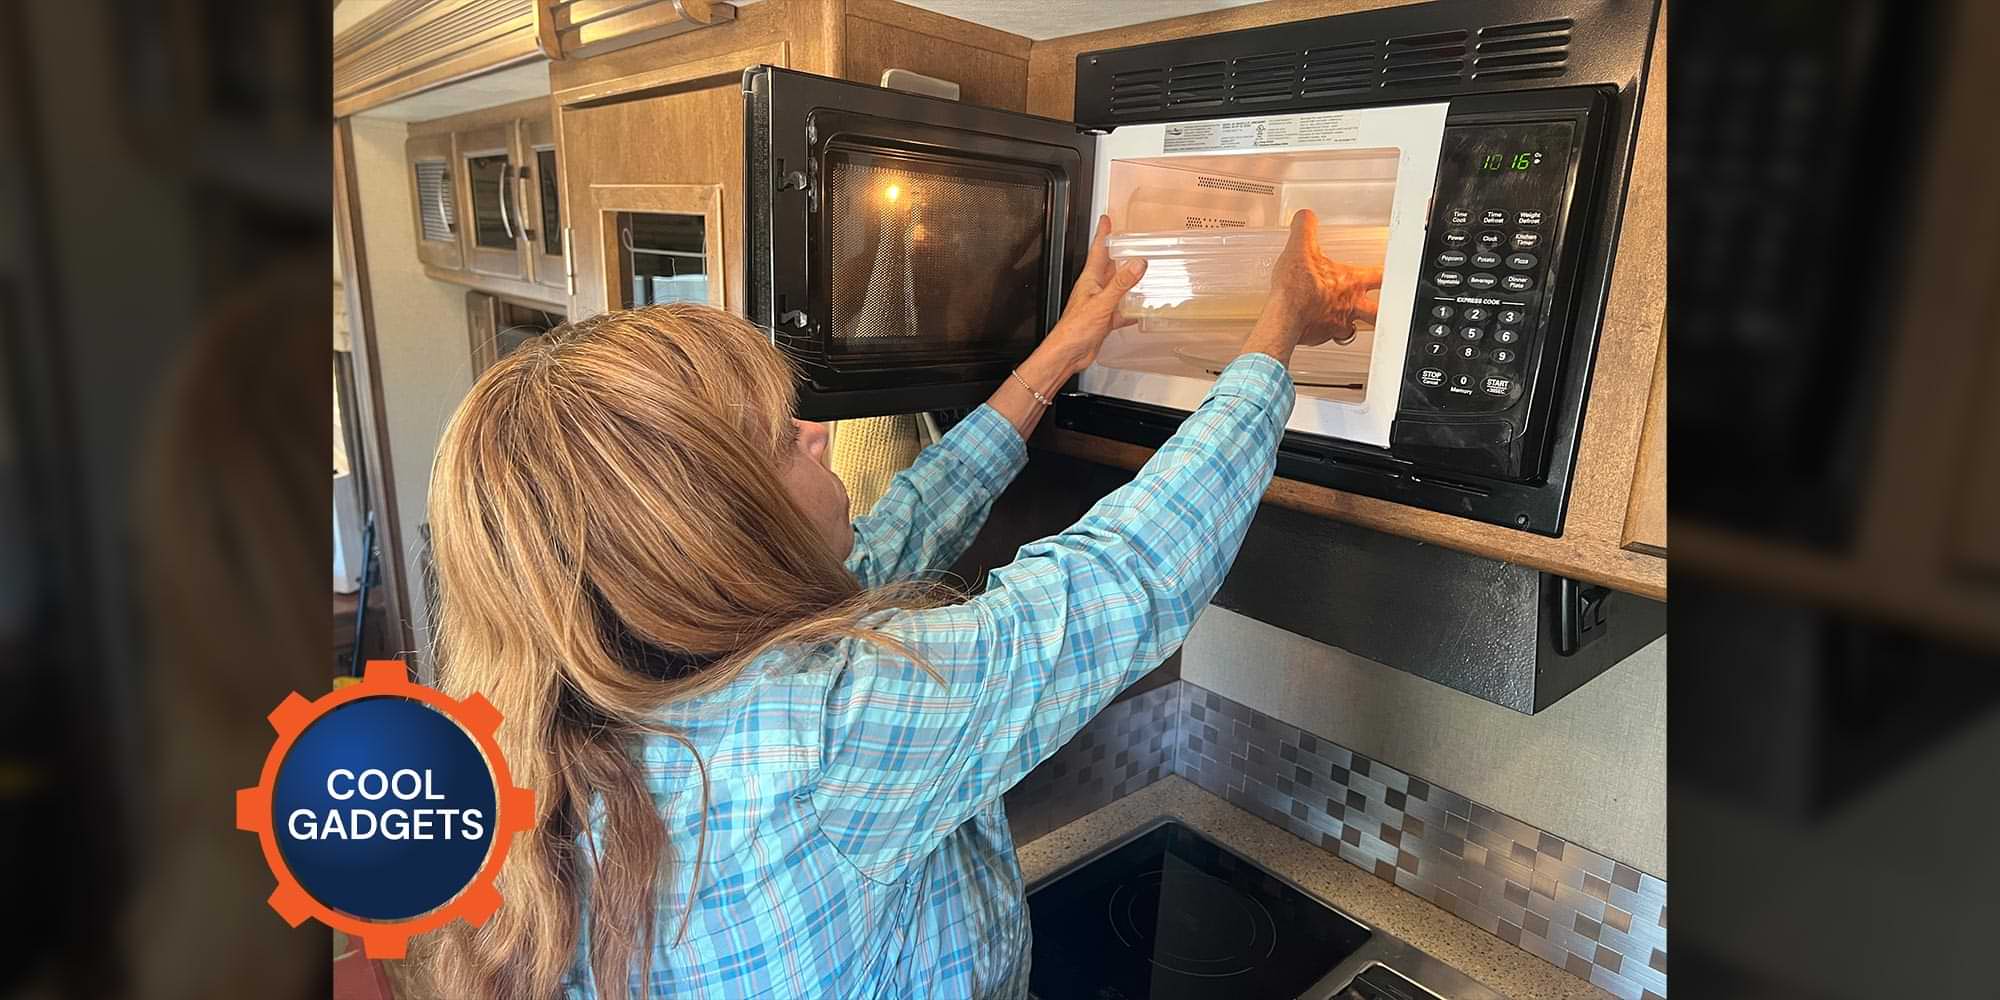 a woman places a rectangular container in an overhead RV microwave